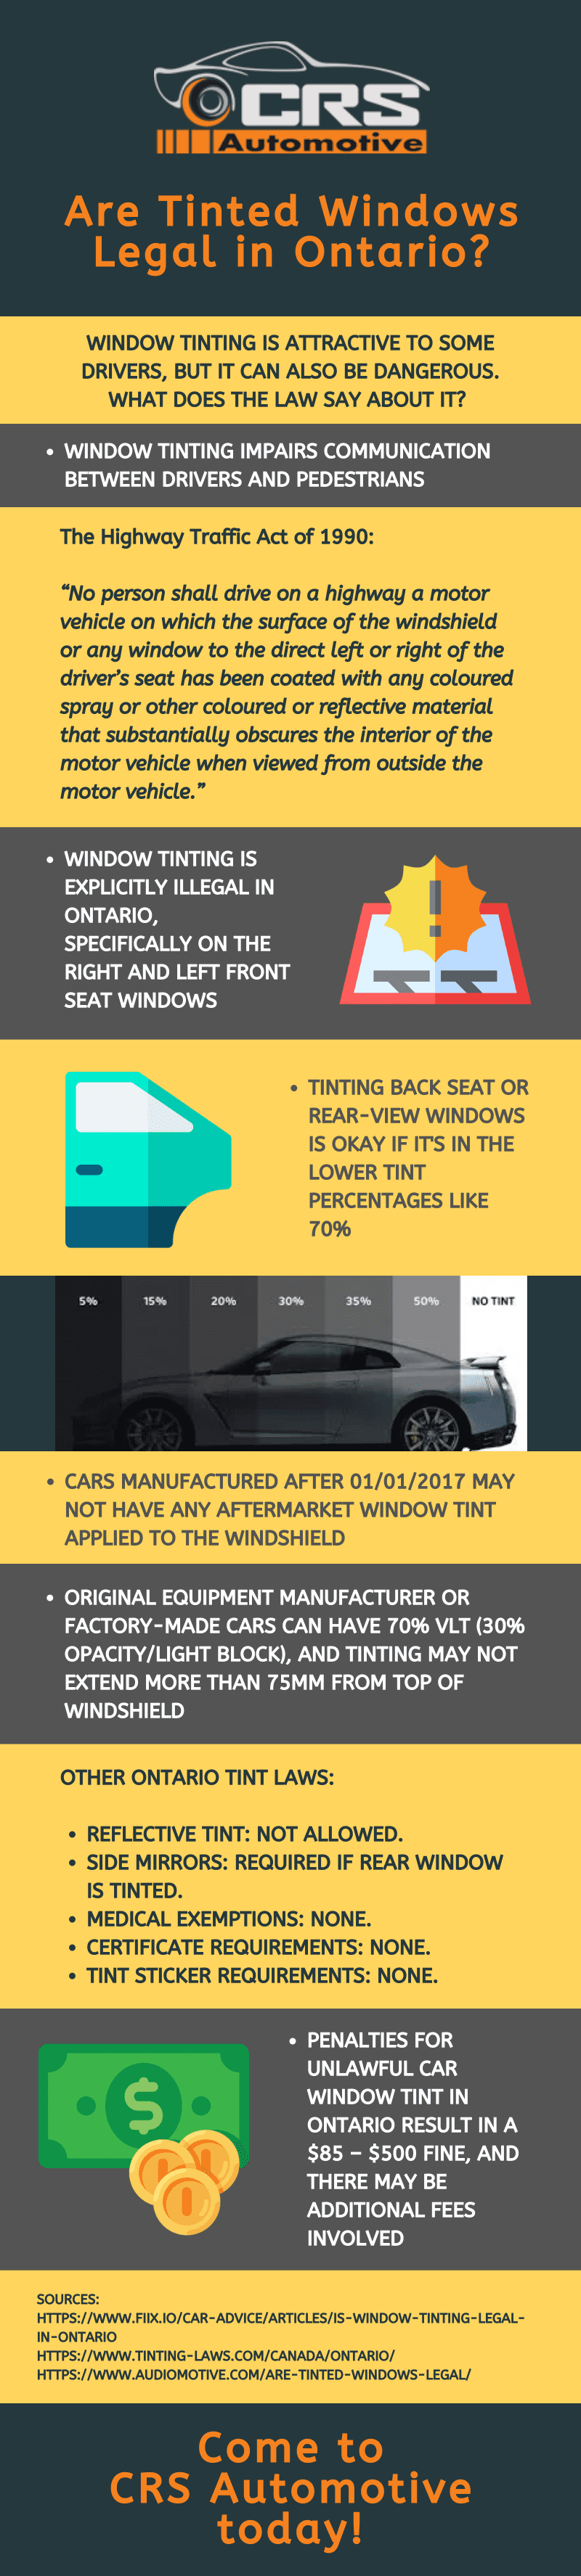 Are Tinted Windows Legal in Ontario infographic